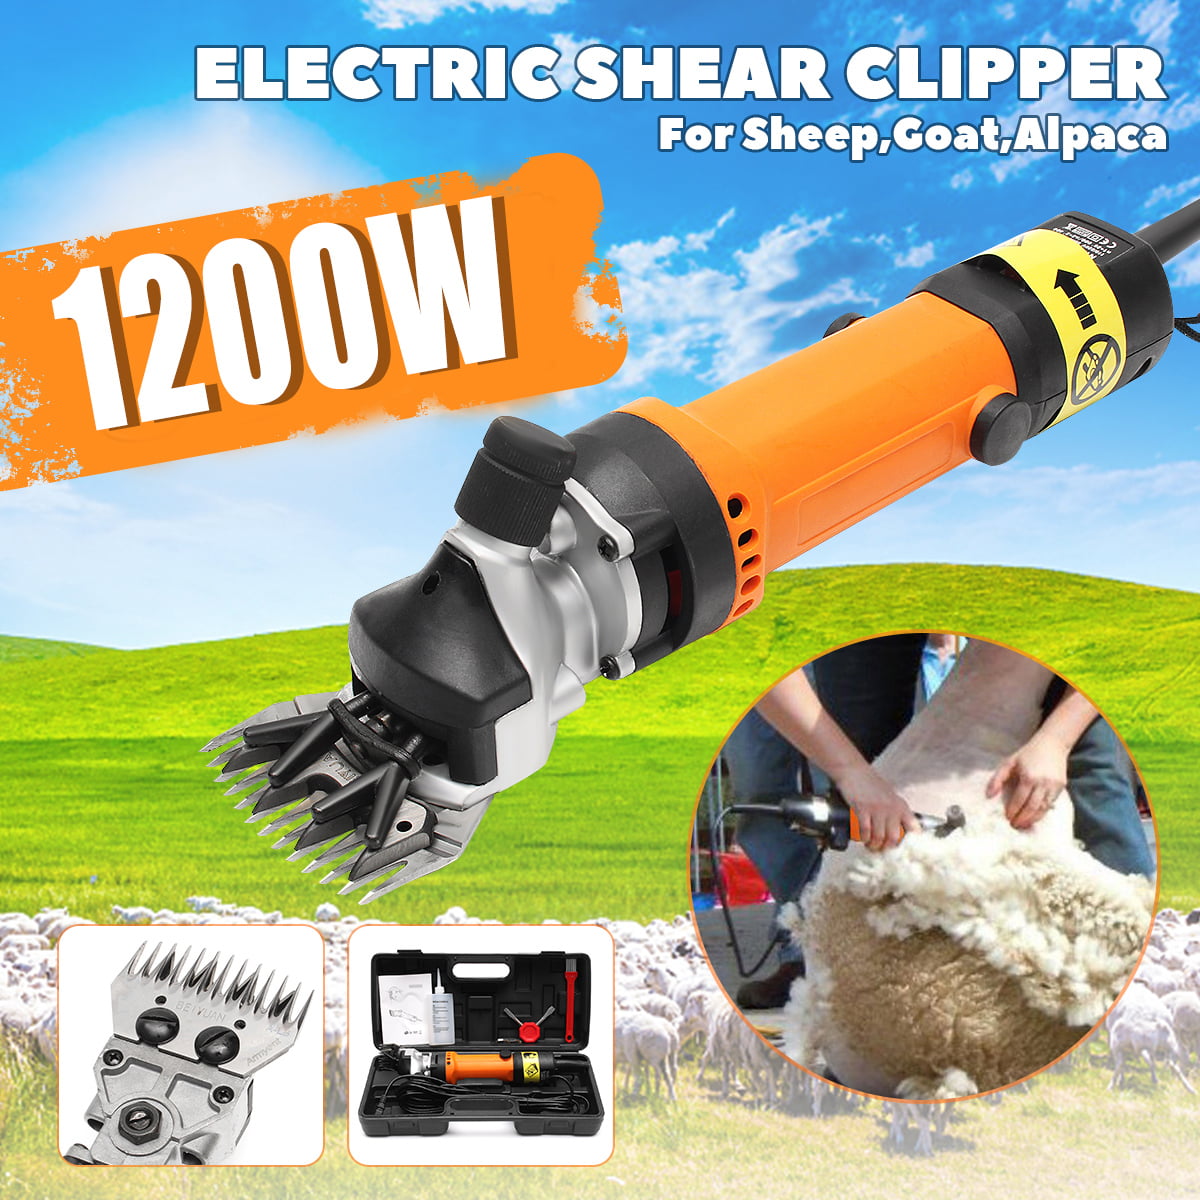 1200W Electric Sheep Shear Clipper Wool Goats Livestock Trimmer Grooming 220V L 